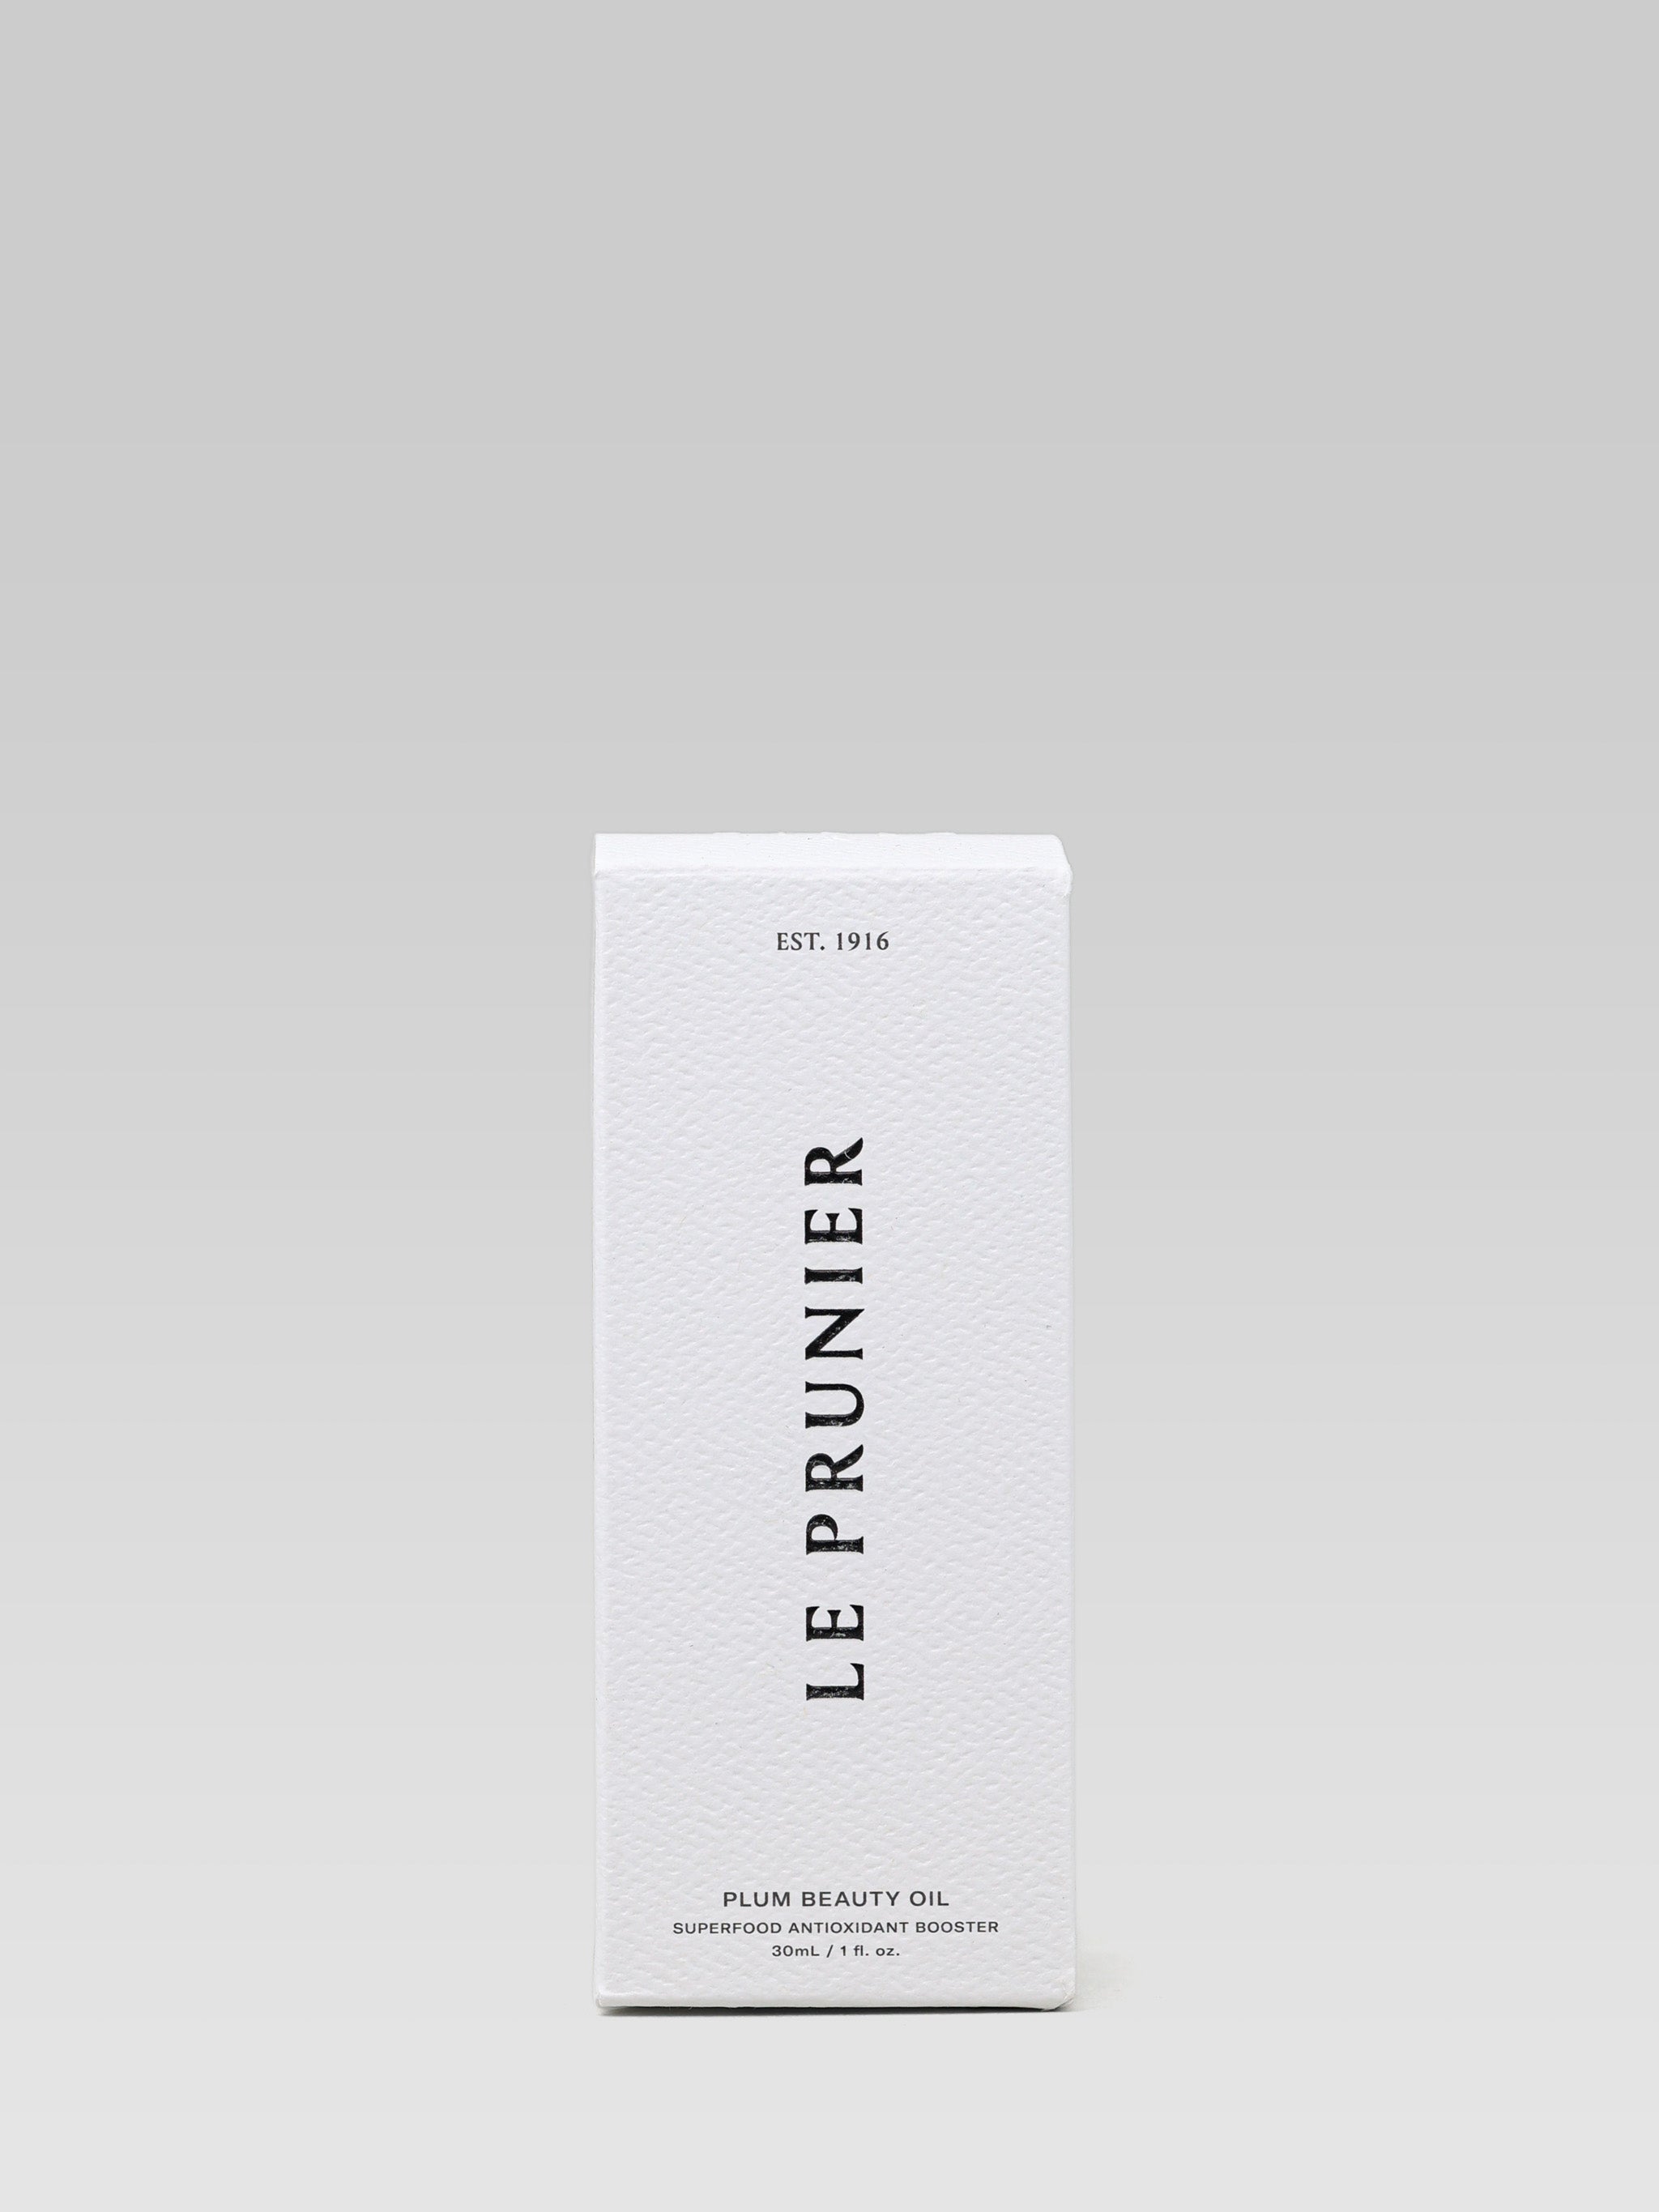 Le Prunier Plum Beauty Oil product packaging 